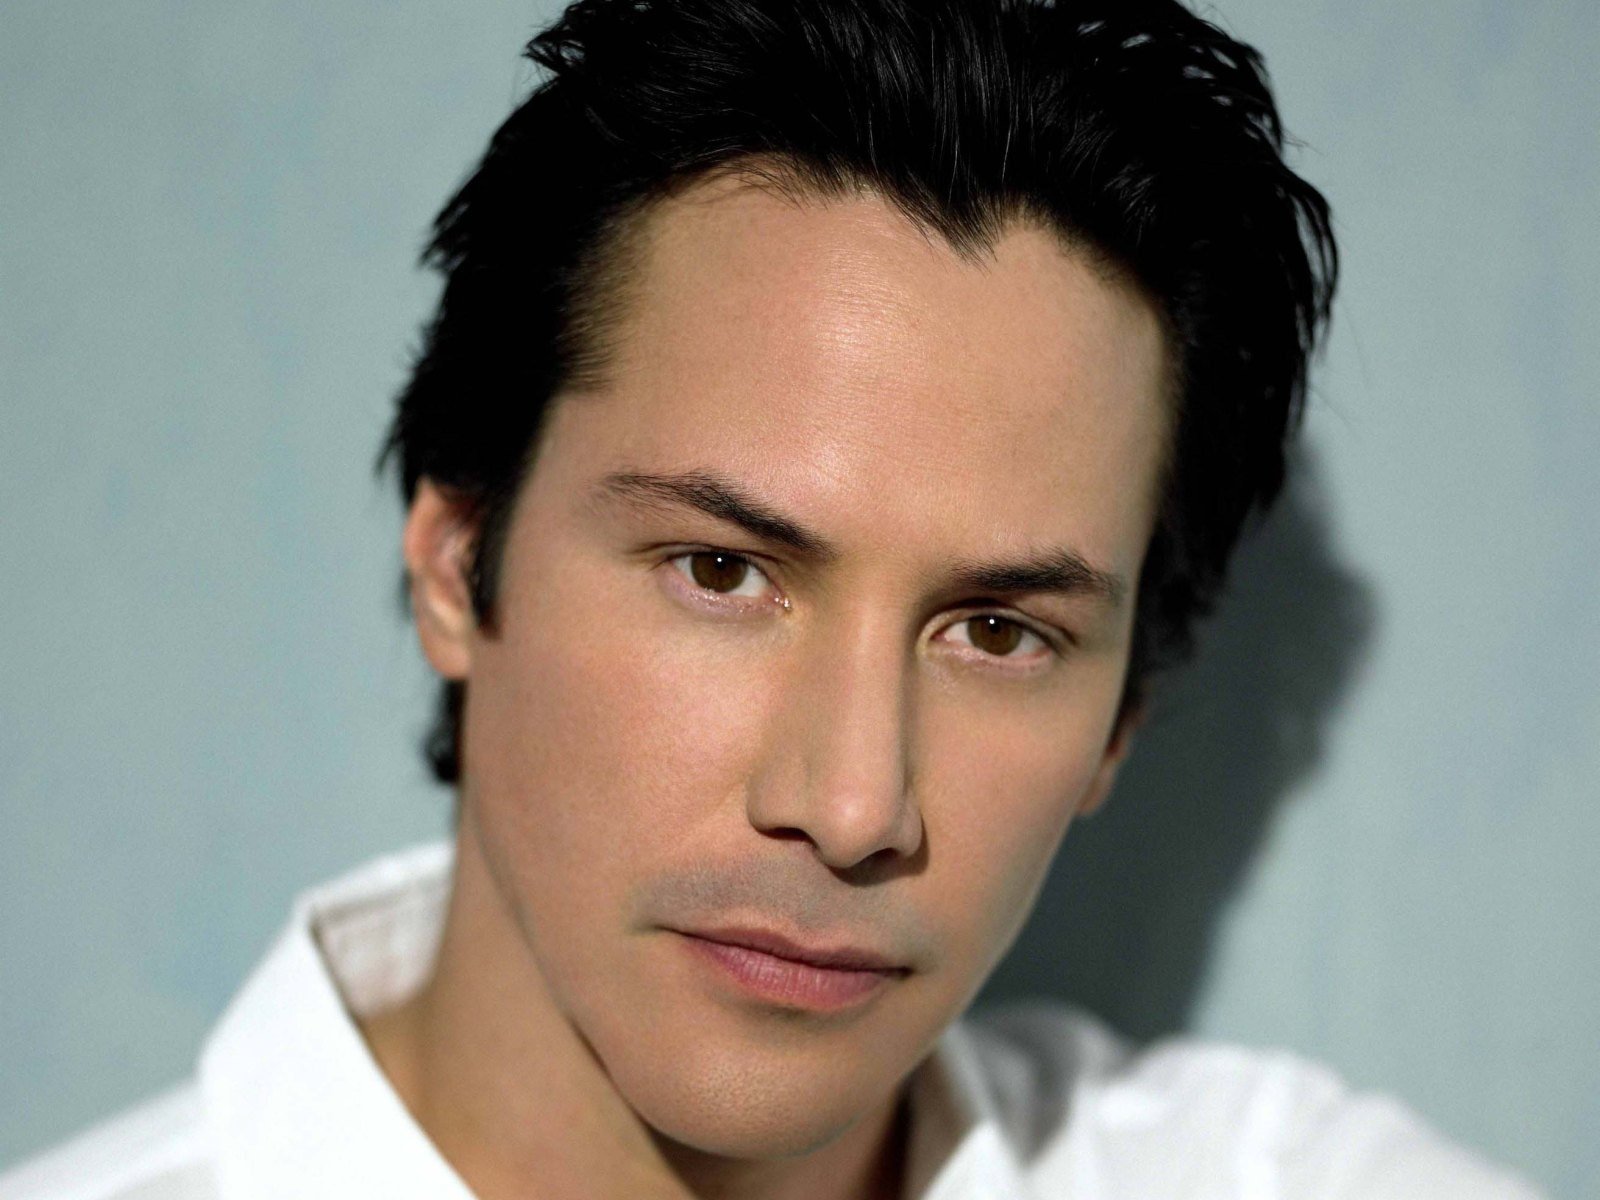 Keanu Reeves Wallpaper and Background Image | 1600x1200 | ID:3373131600 x 1200